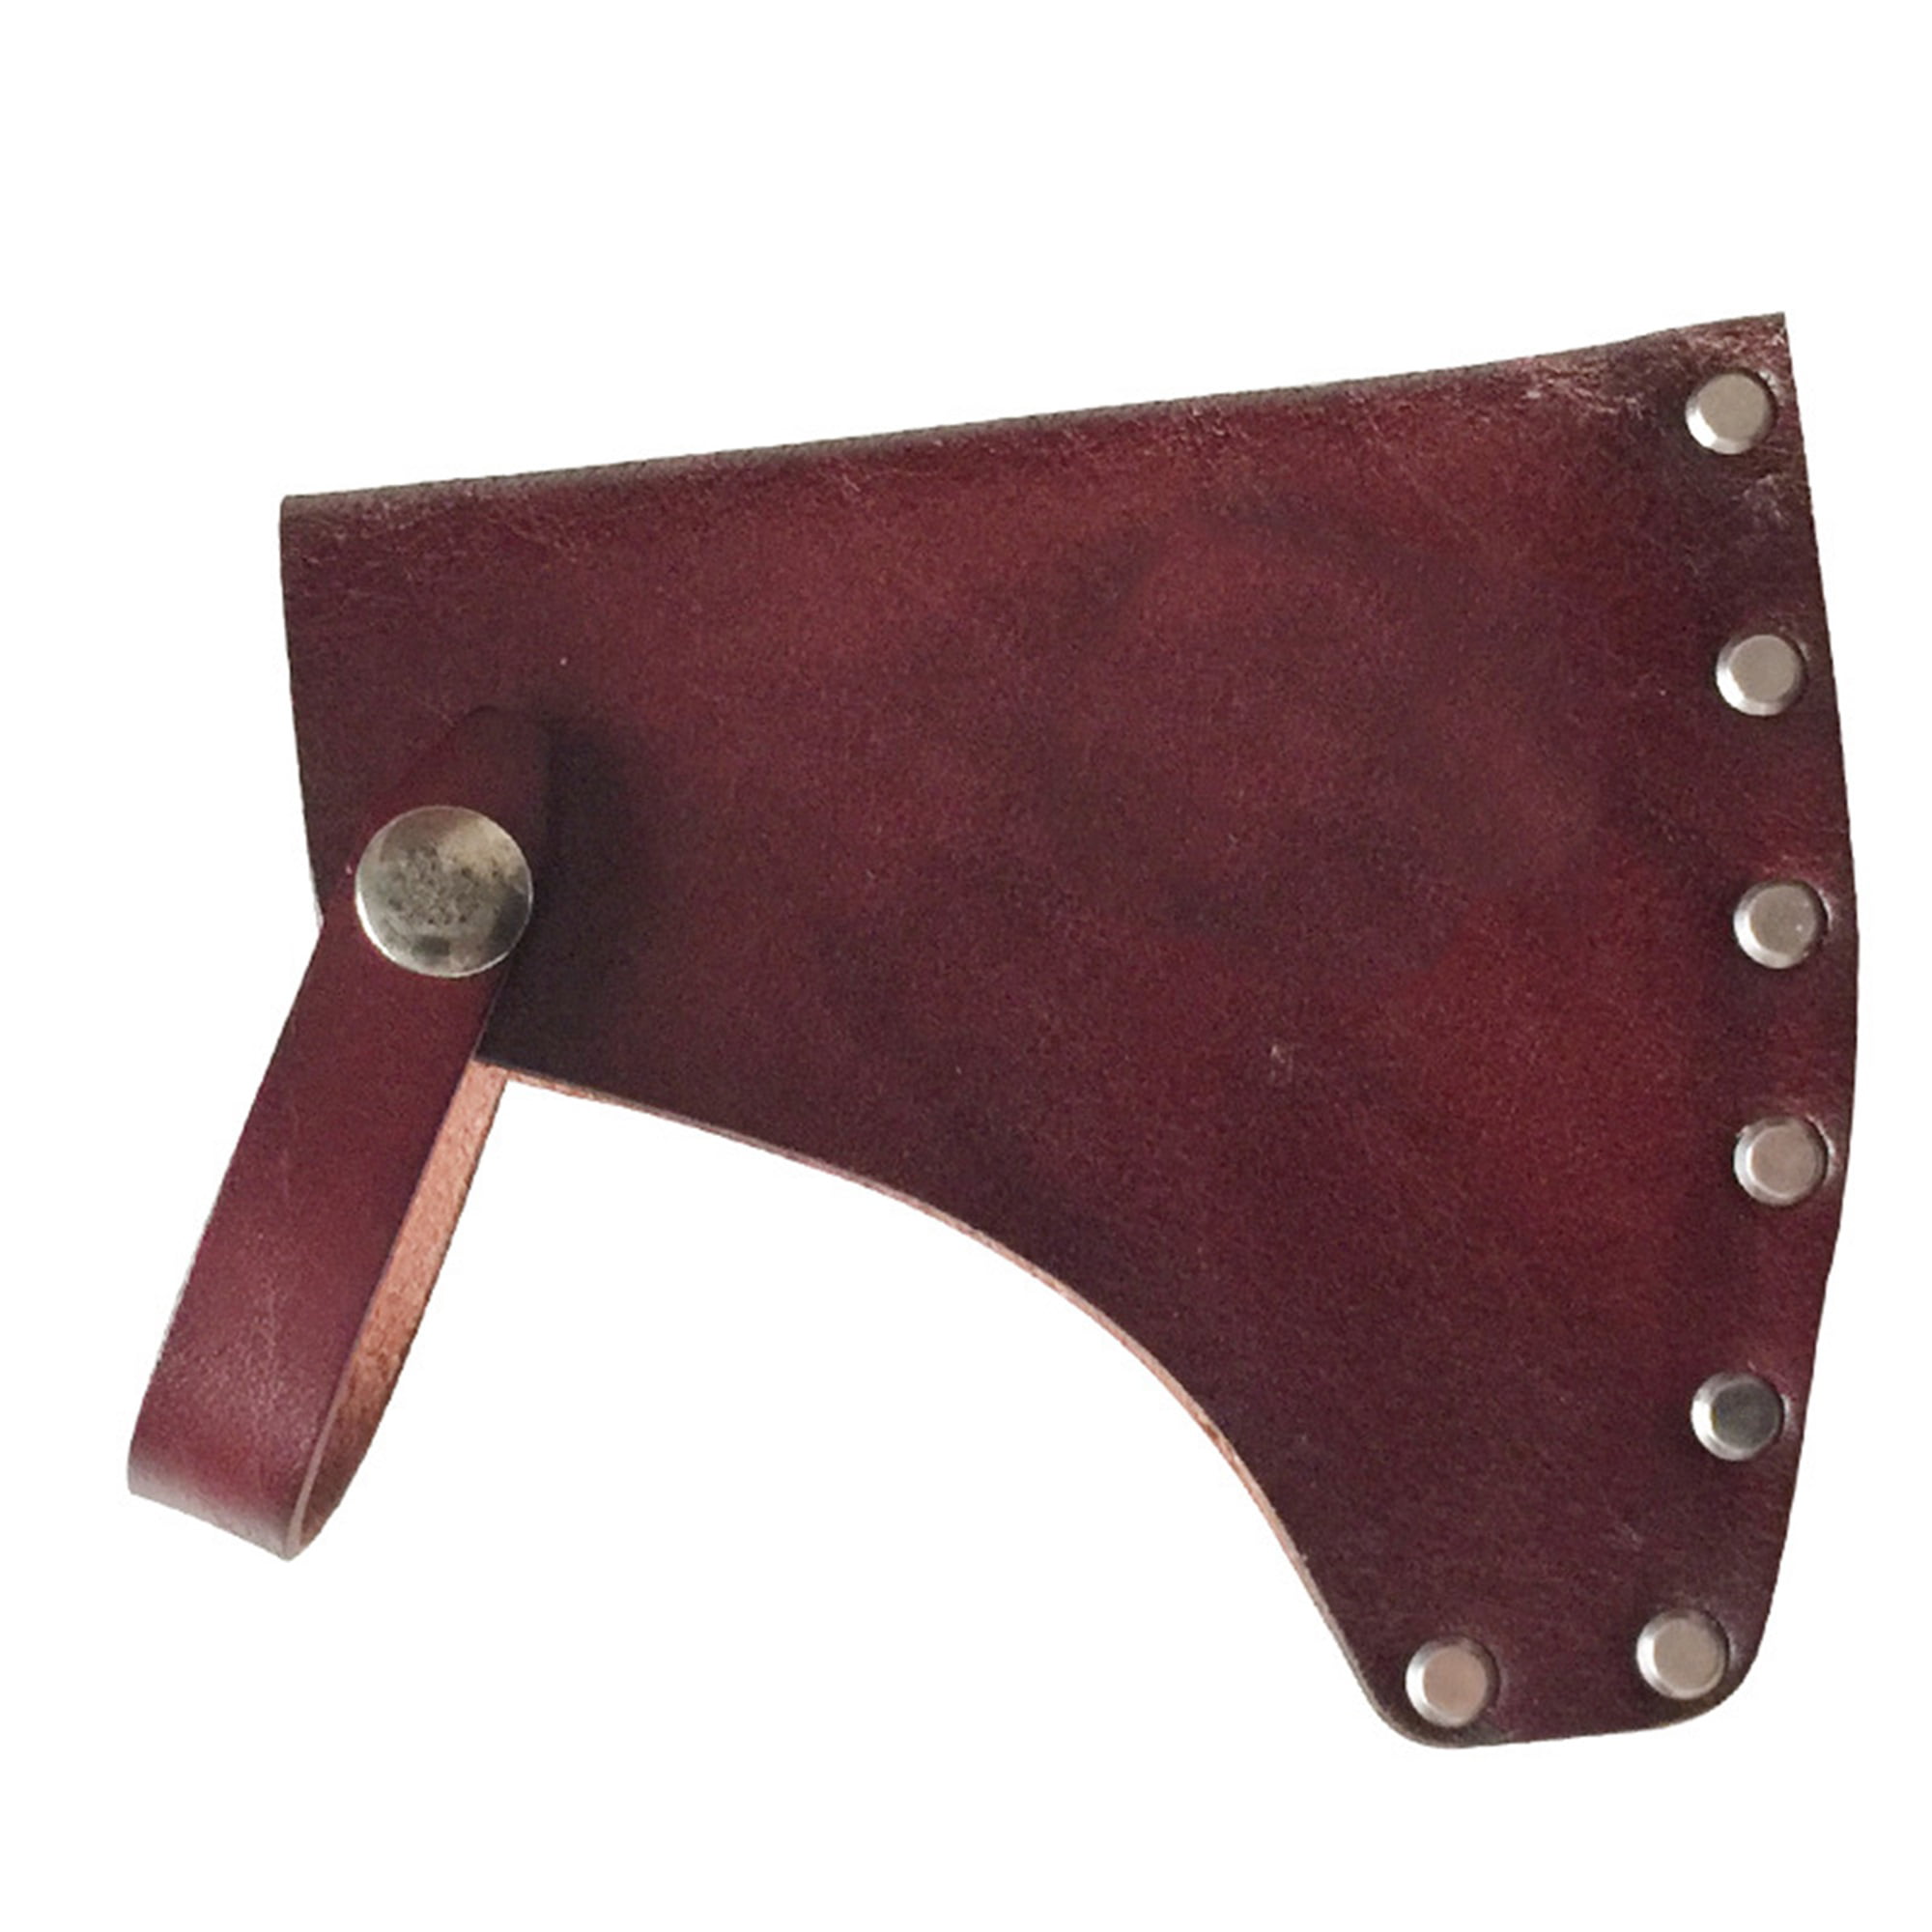 Axe Blade Cover Sheath Head Holster Hatchet Protector Stitched and Rivet 